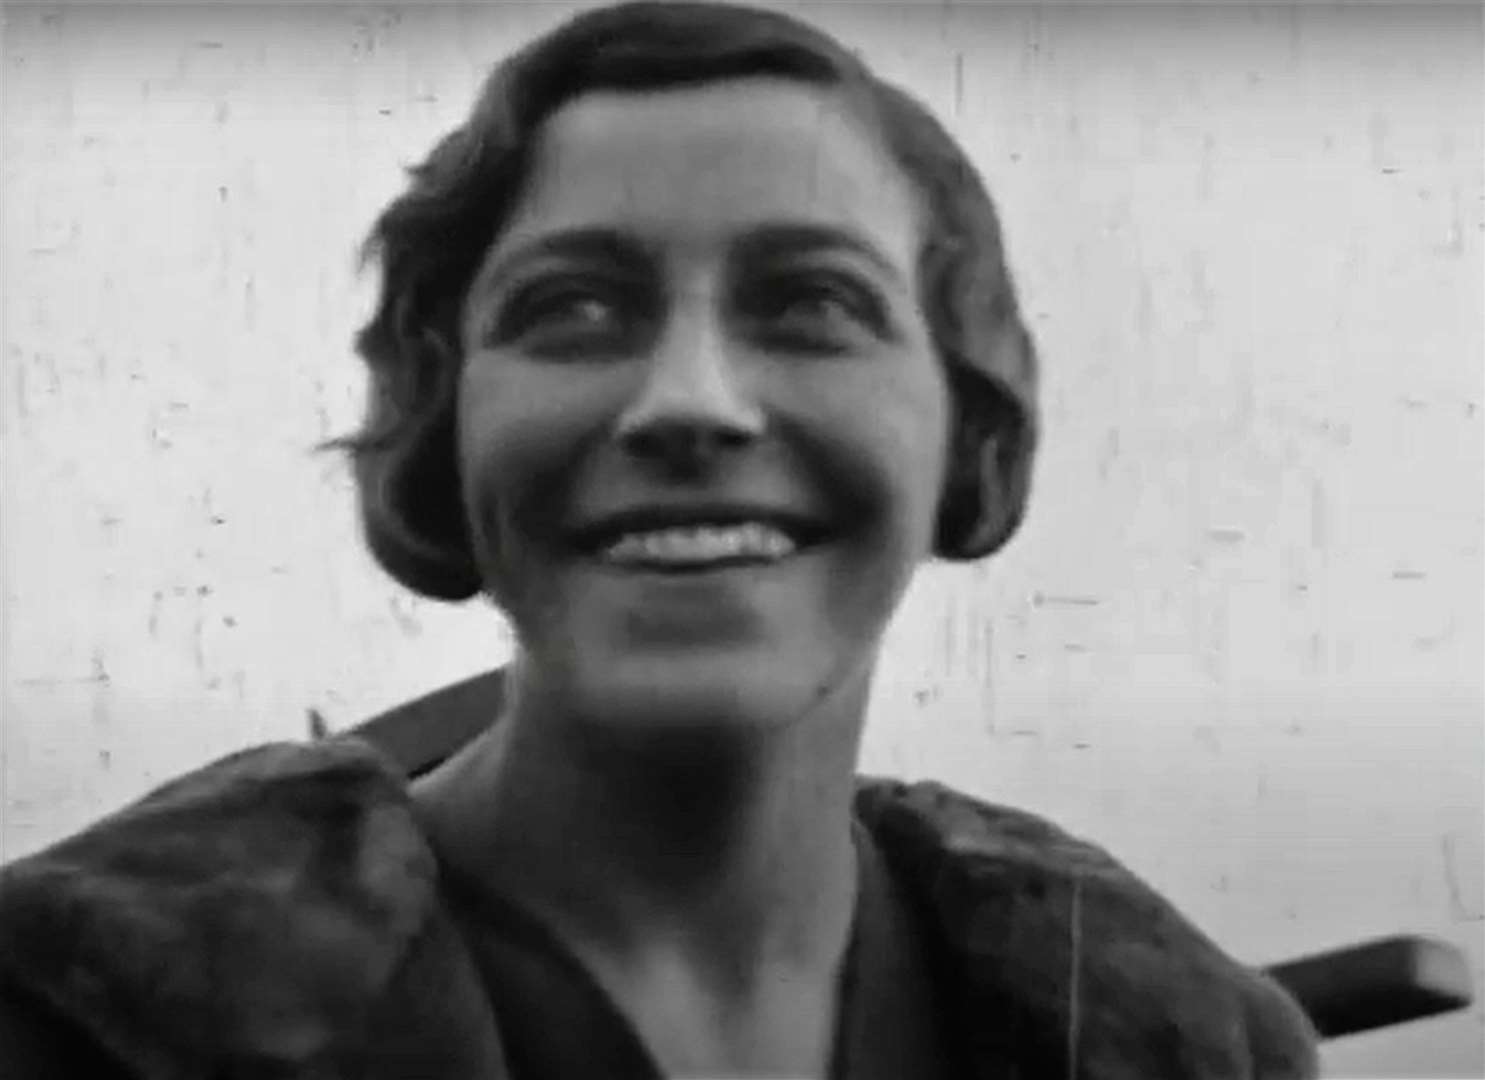 Amy Johnson achieved global fame thanks to her flying endeavours. Picture: British Pathe / YouTube